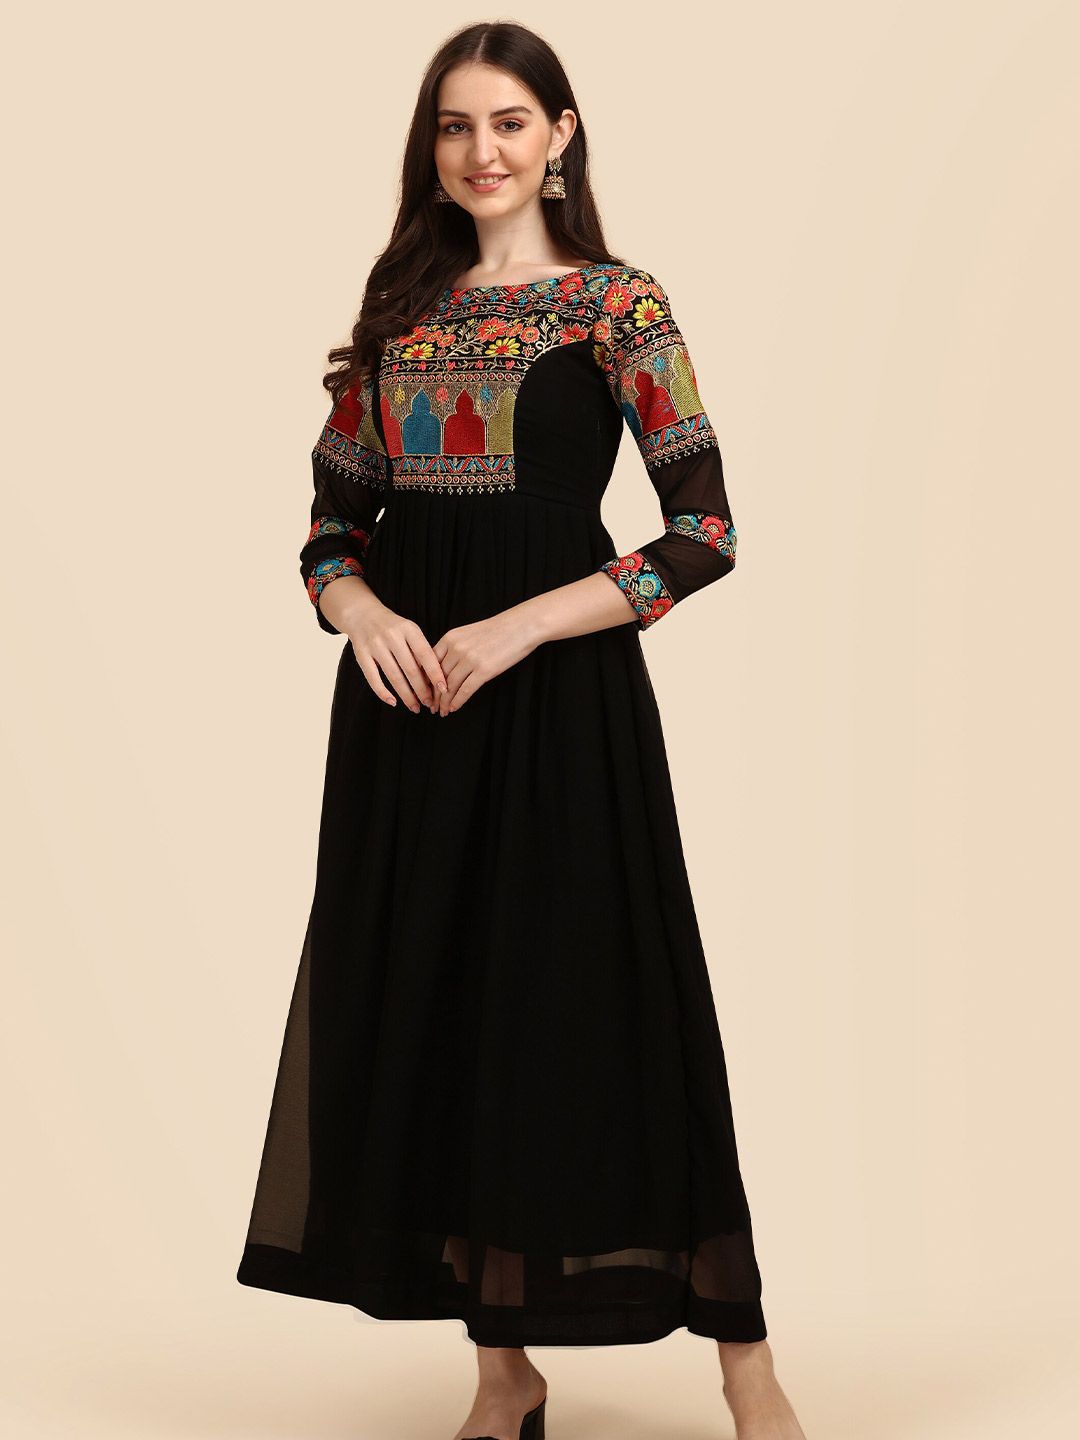 Vidraa Western Store Black Ethnic Motifs Embroidered Georgette Maxi Dress Price in India